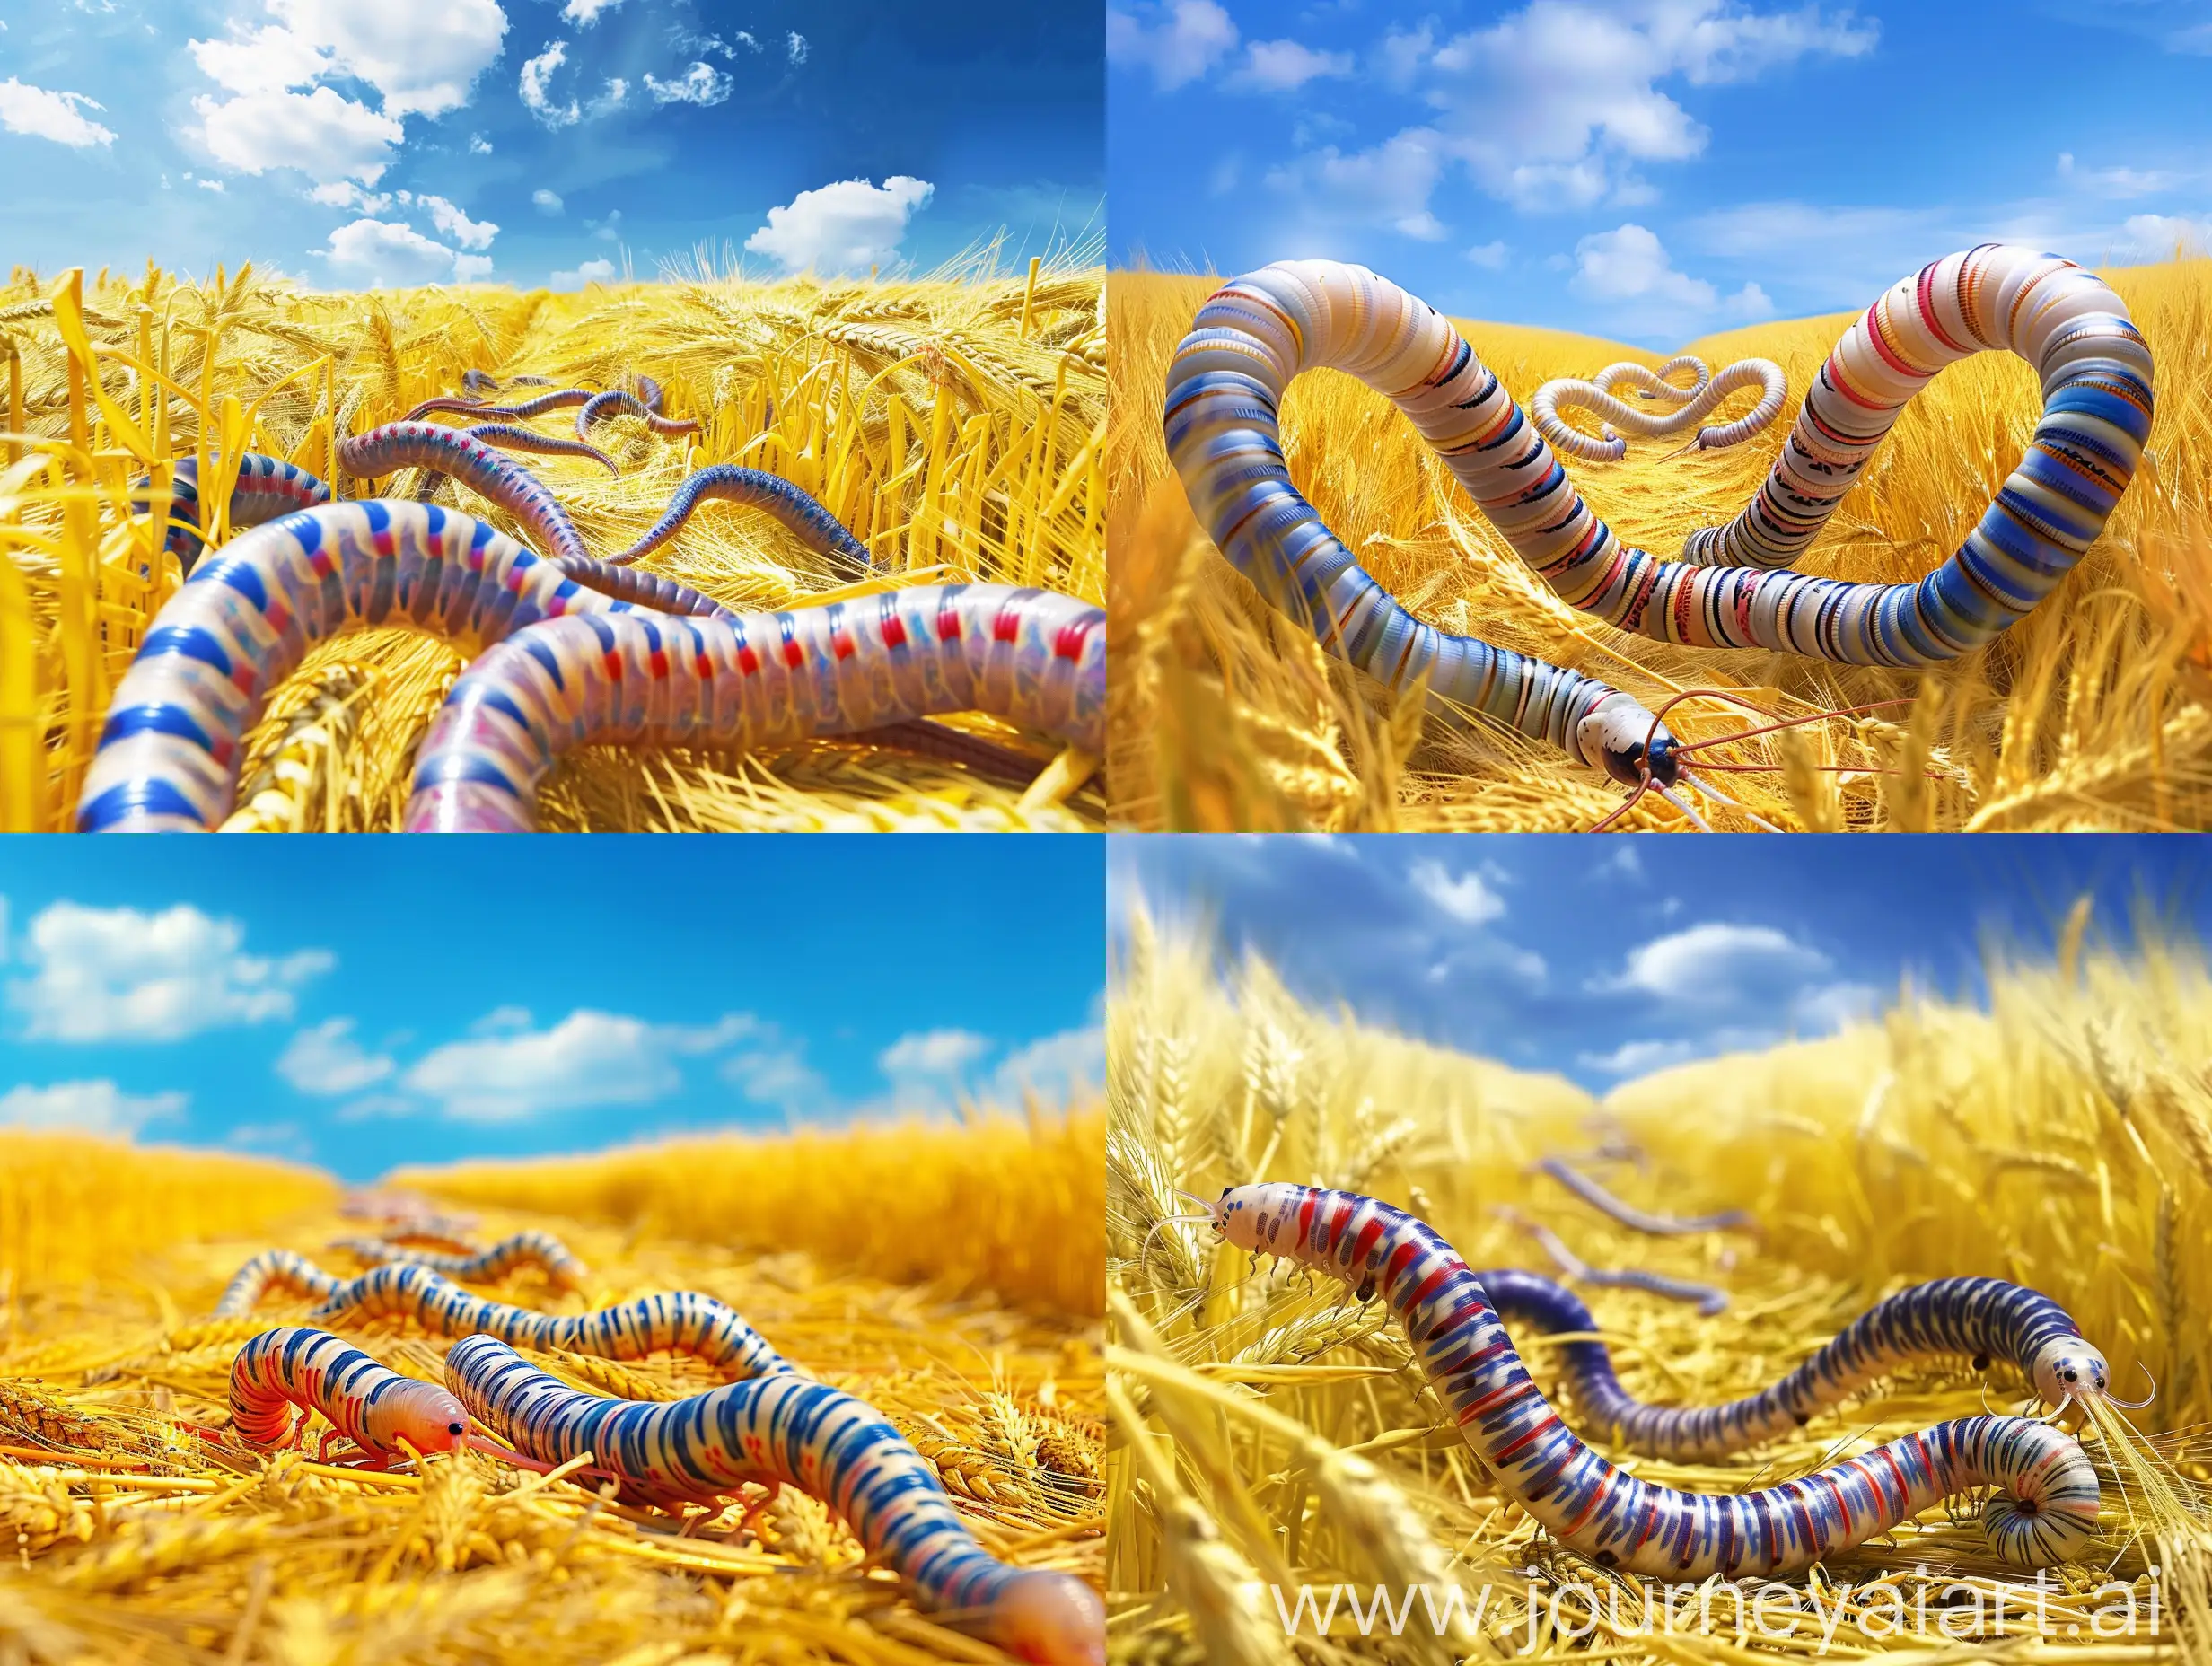 Striped-Worms-Crawling-Through-Yellow-Wheat-Field-under-Blue-Sky